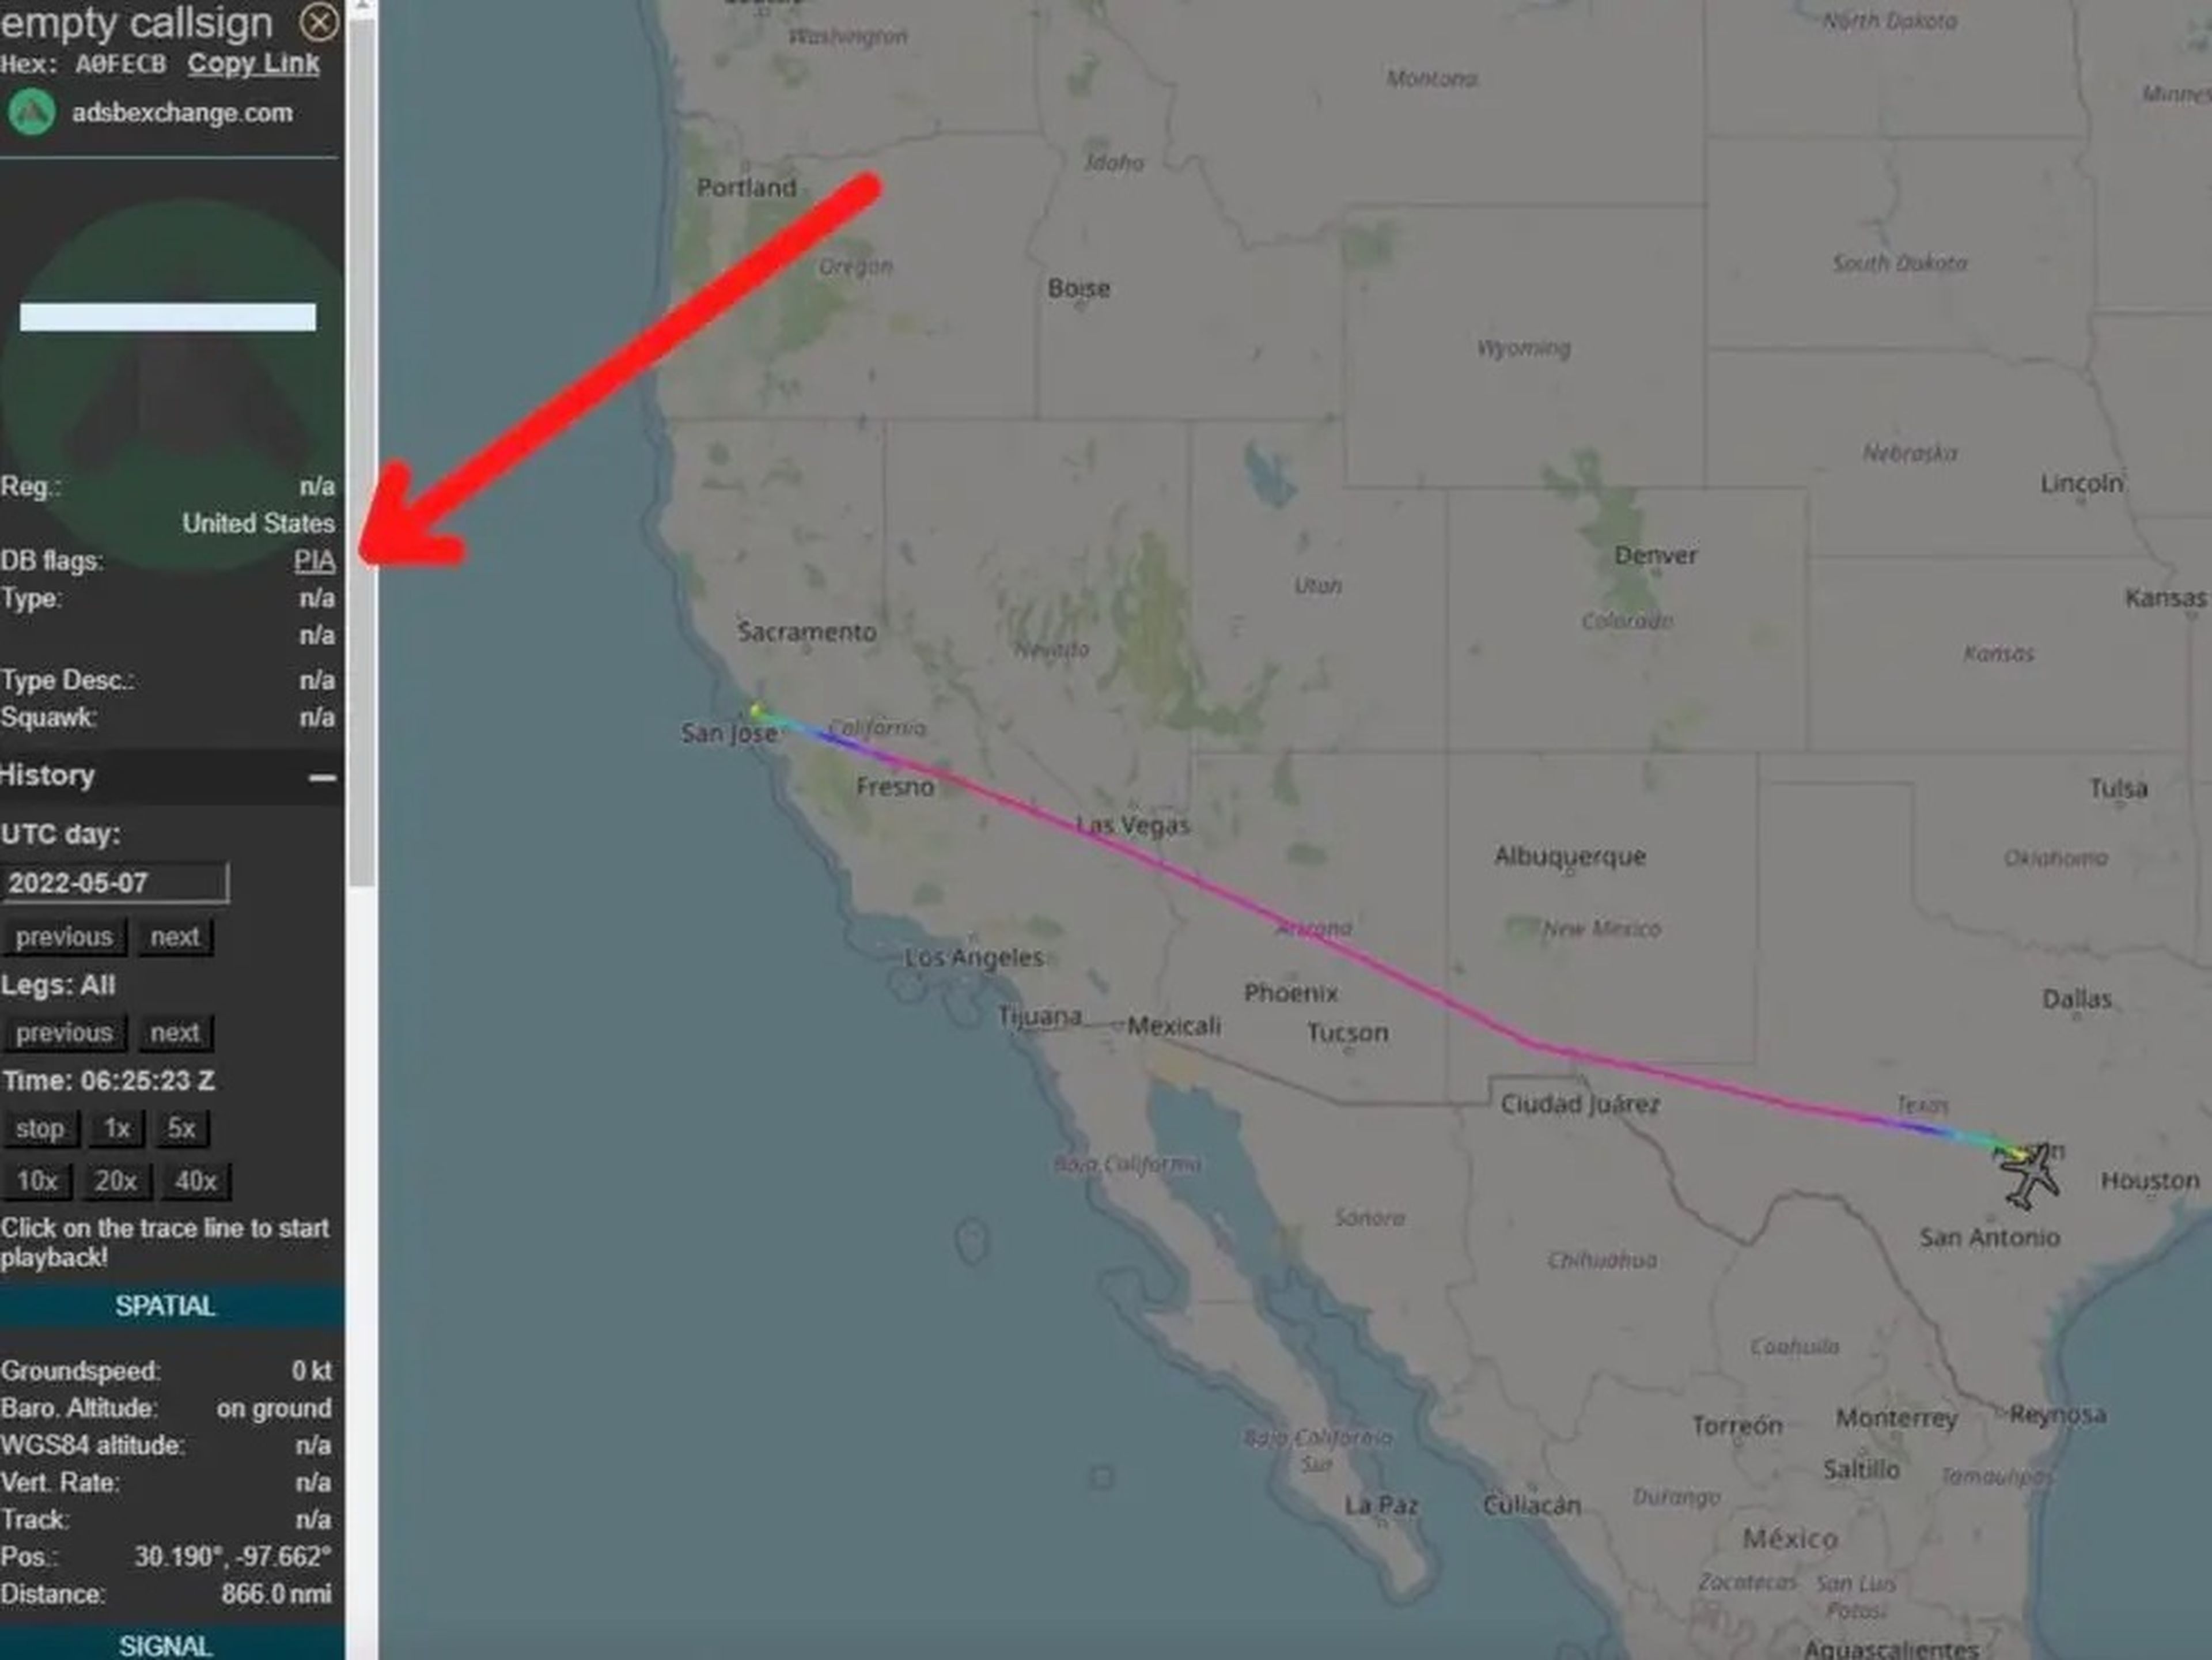 Elon Musk's private jet flight with PIA flag, tracked by Jack Sweeney.